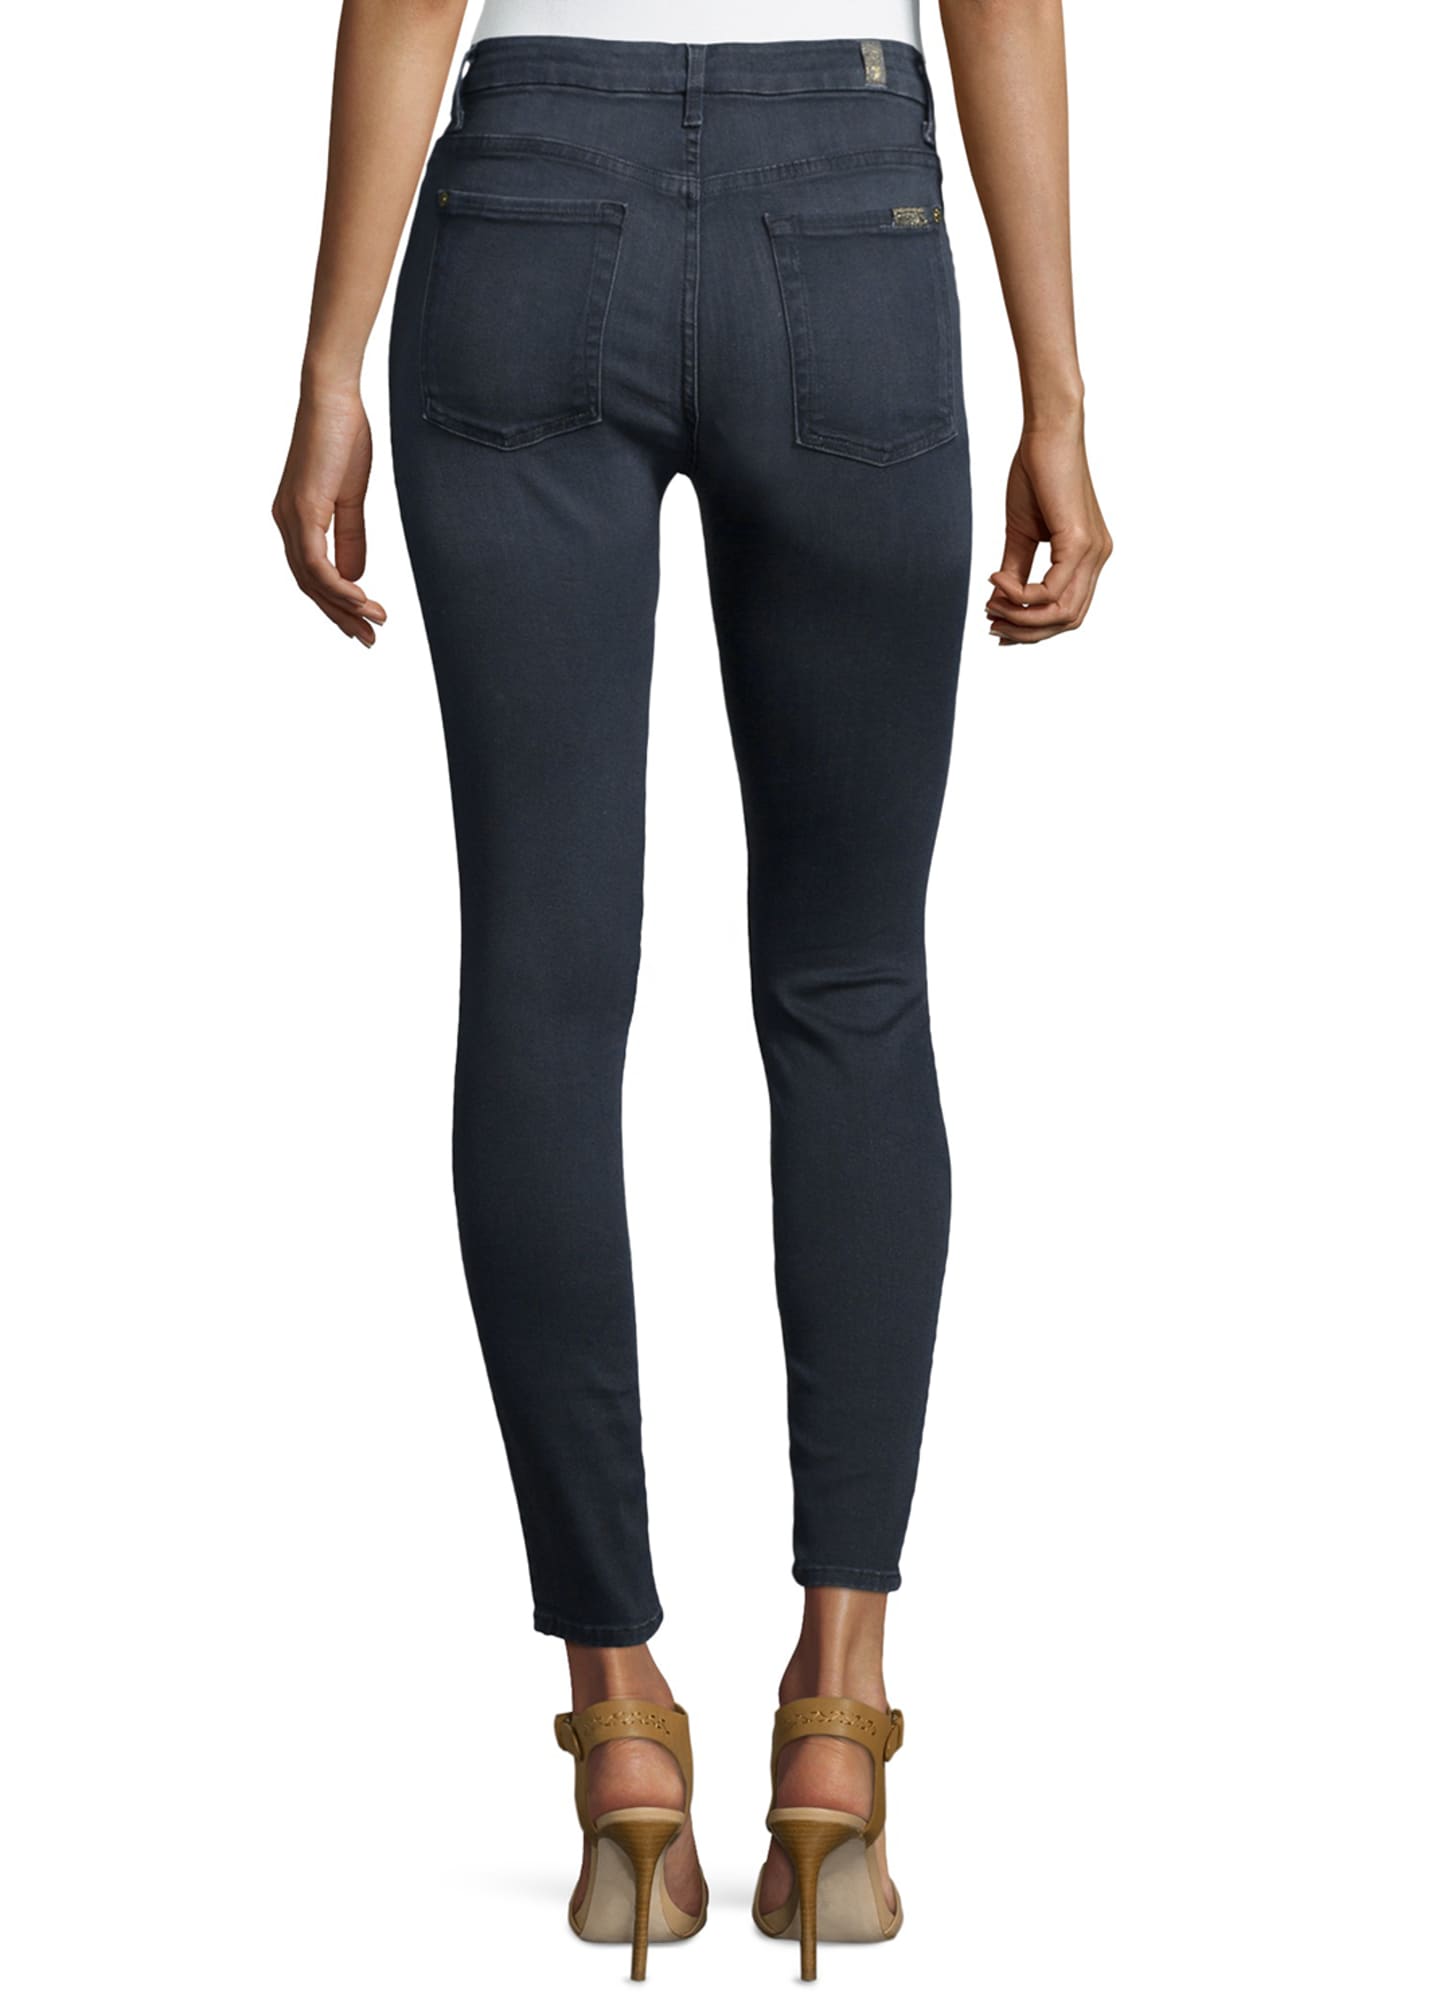 7 for all mankind High-Waist Ankle Skinny Jeans - Bergdorf Goodman